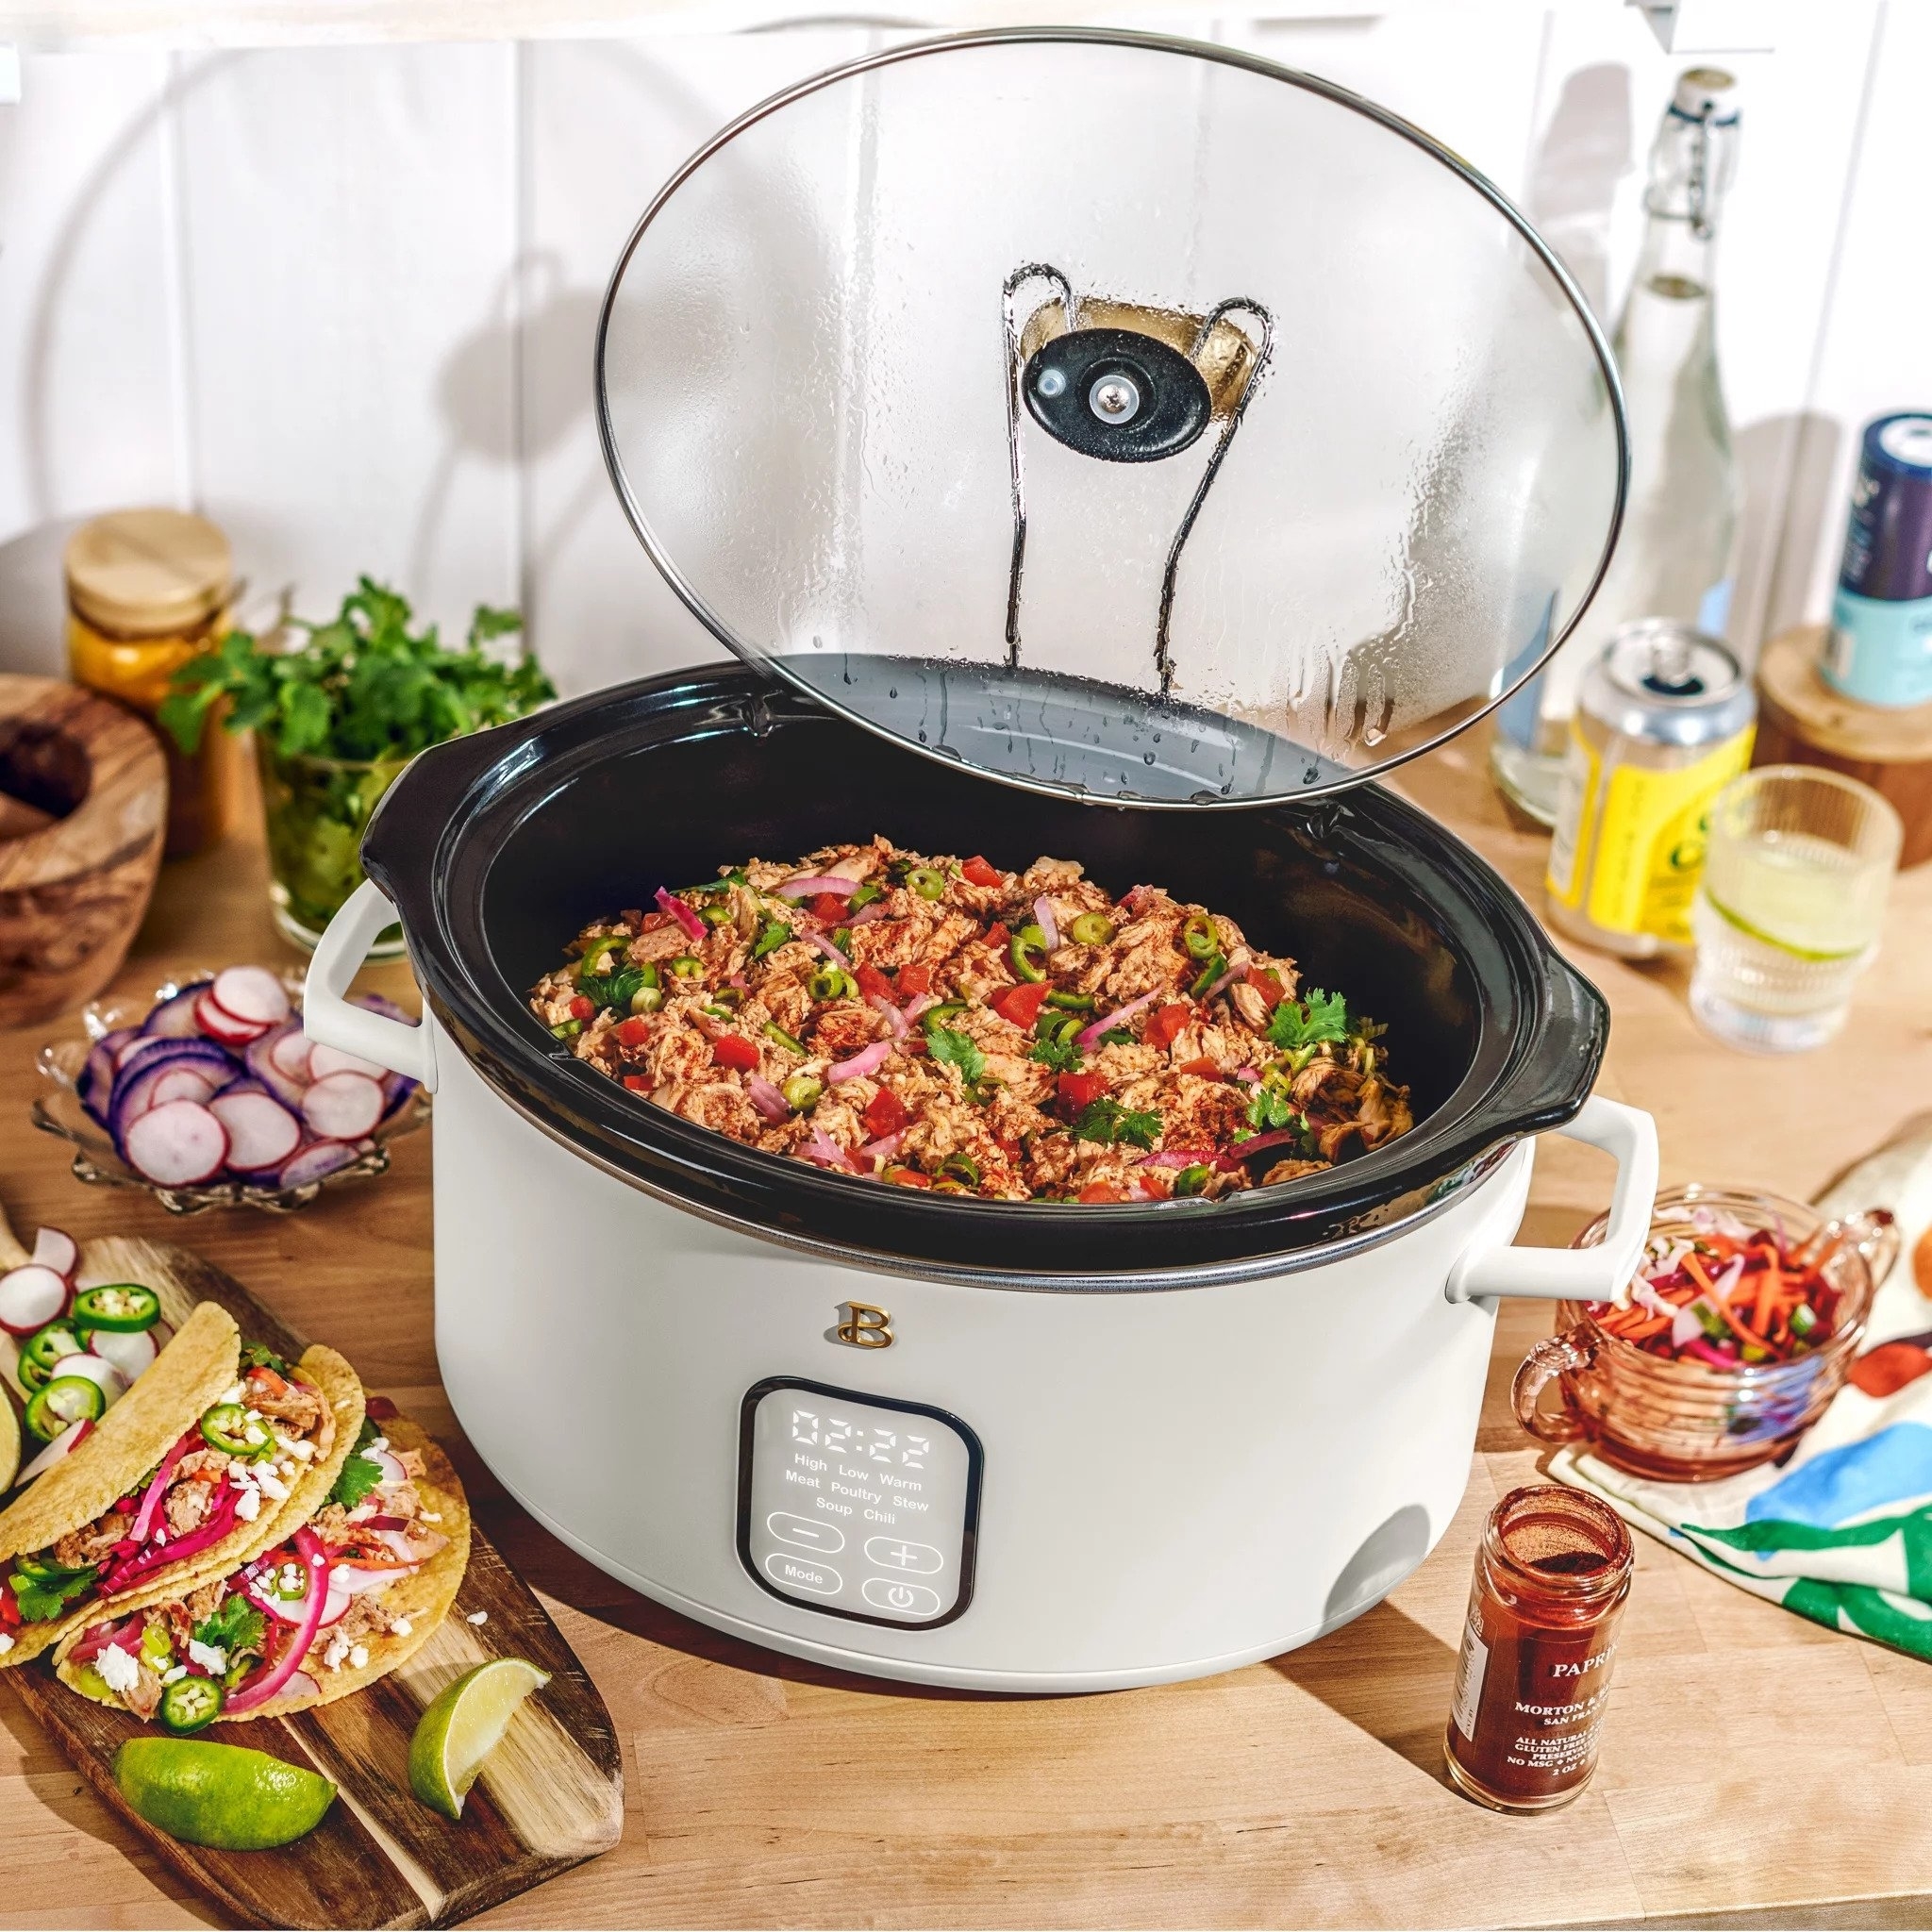 The white slow cooker with its lid open and supported by the rest